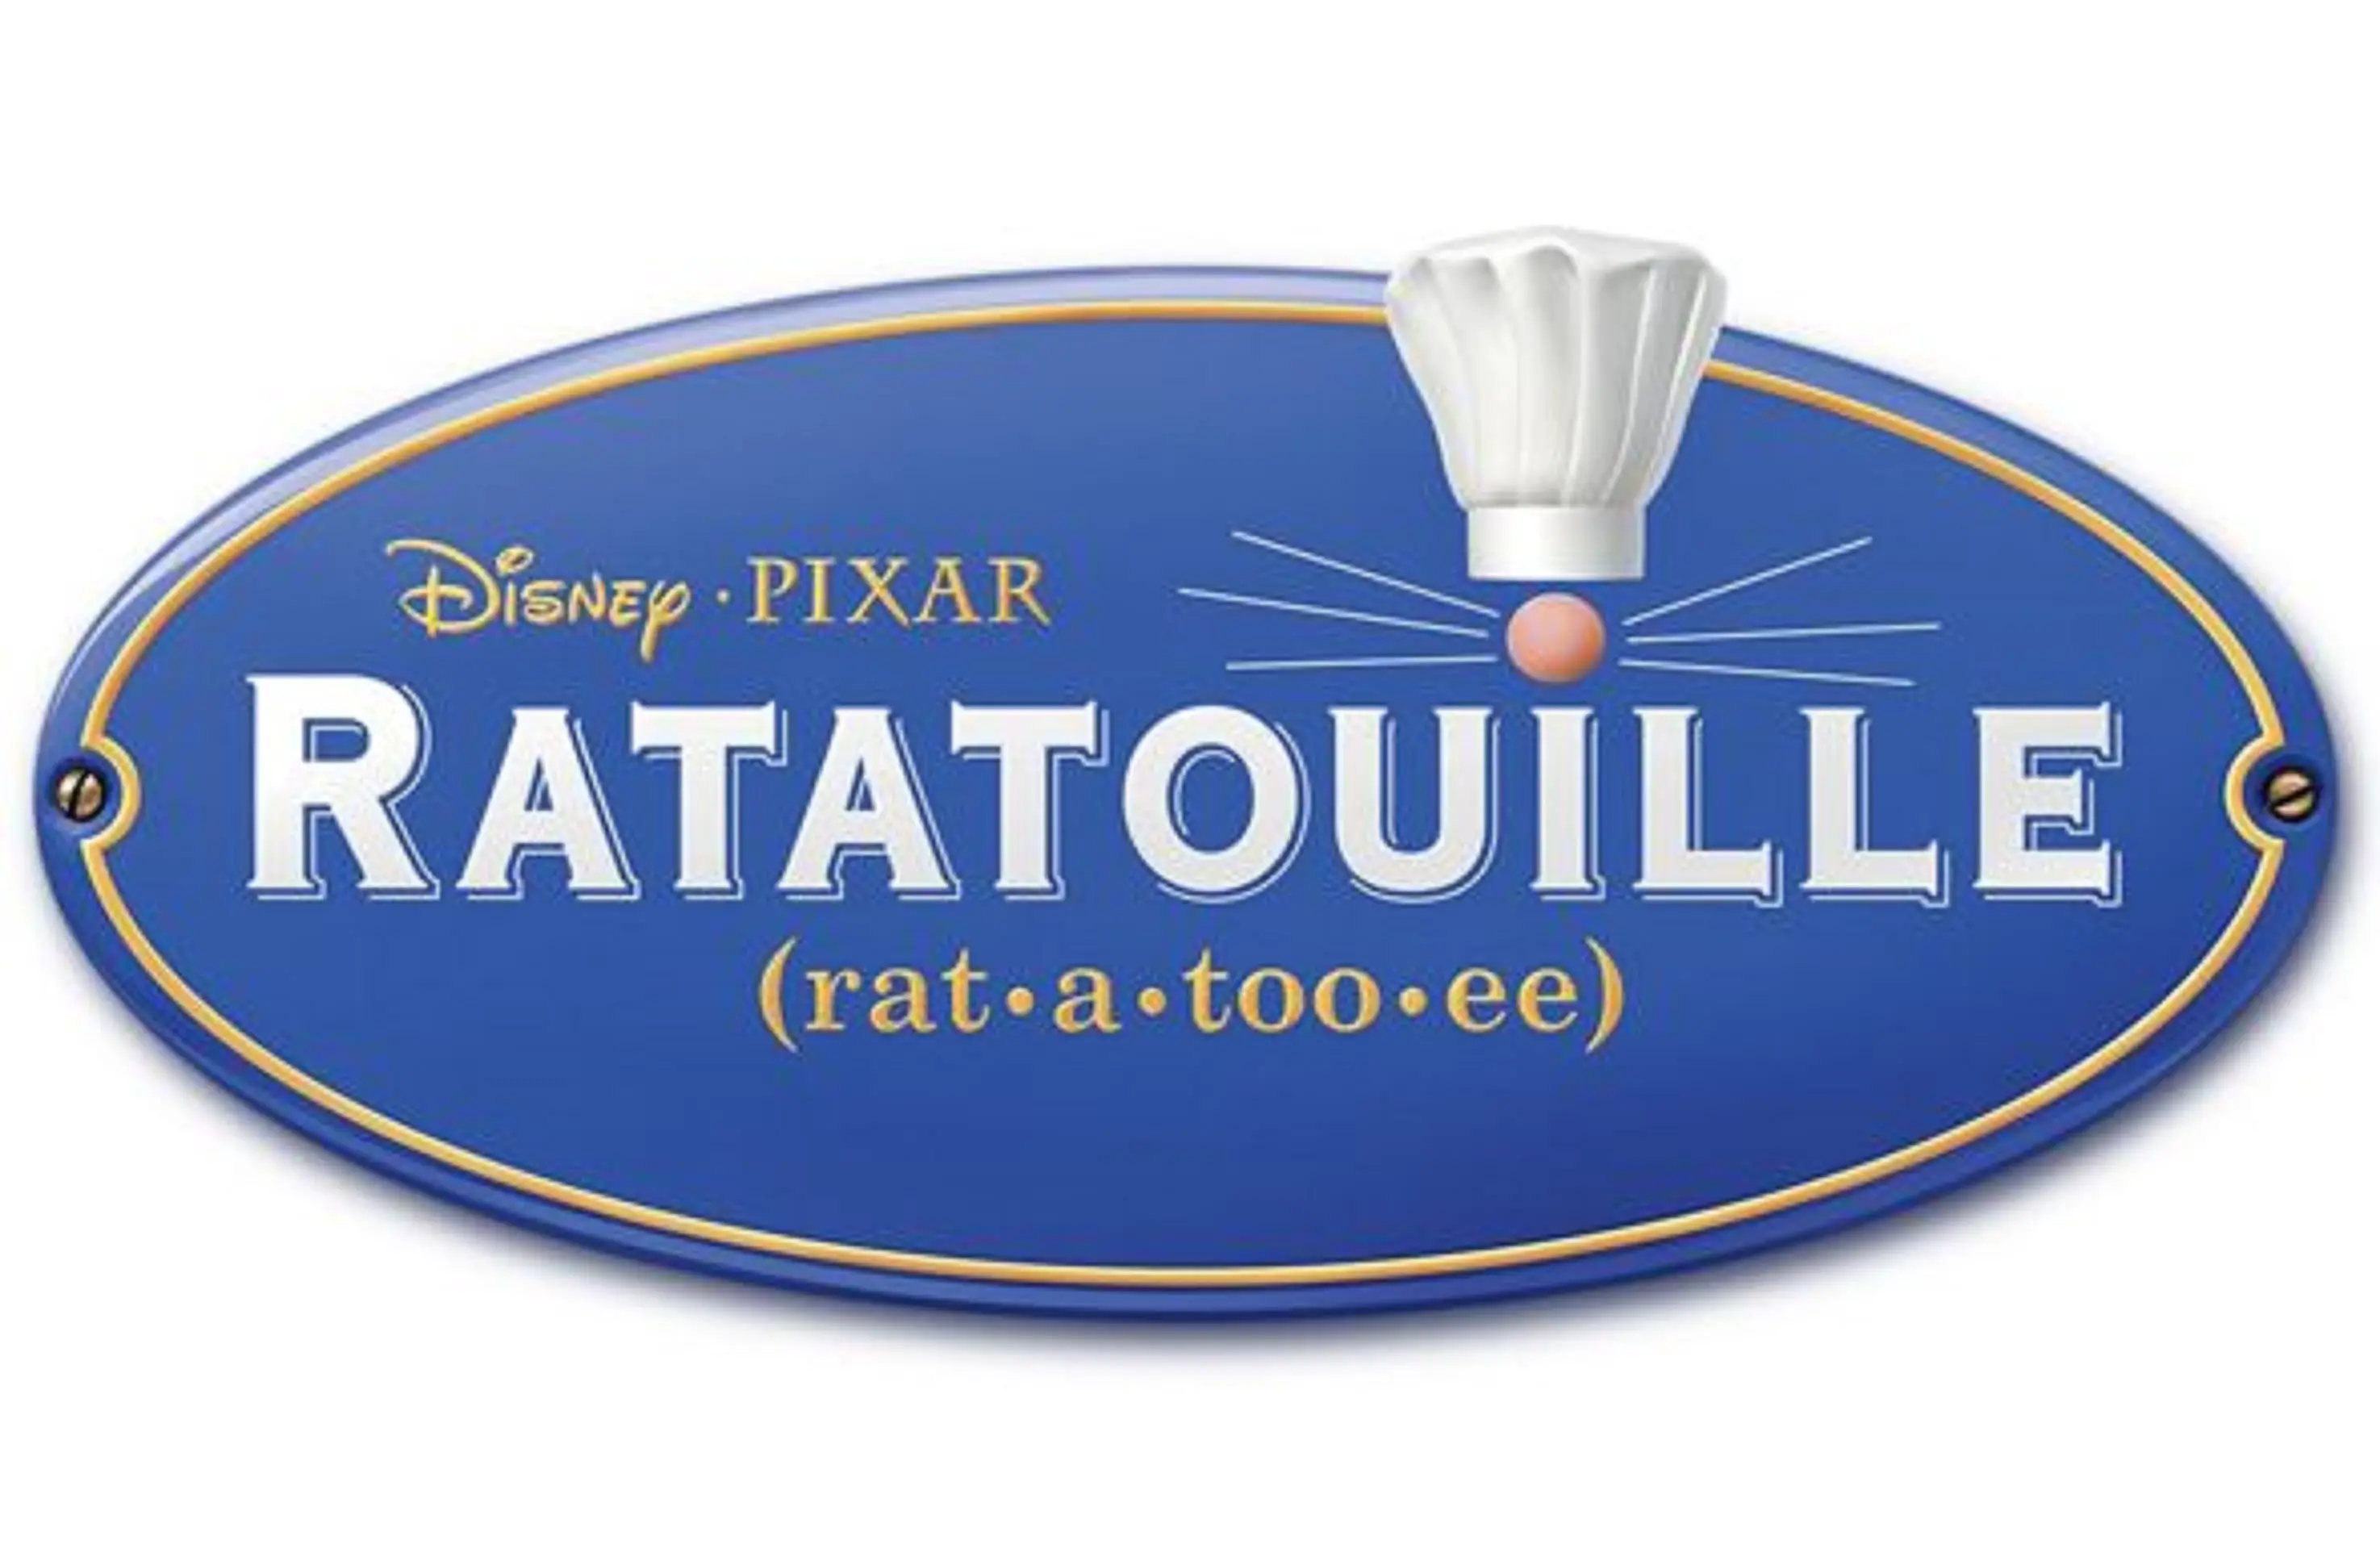 With Images 25 Ratatouille Quotes From Movie | Turtle Quotes